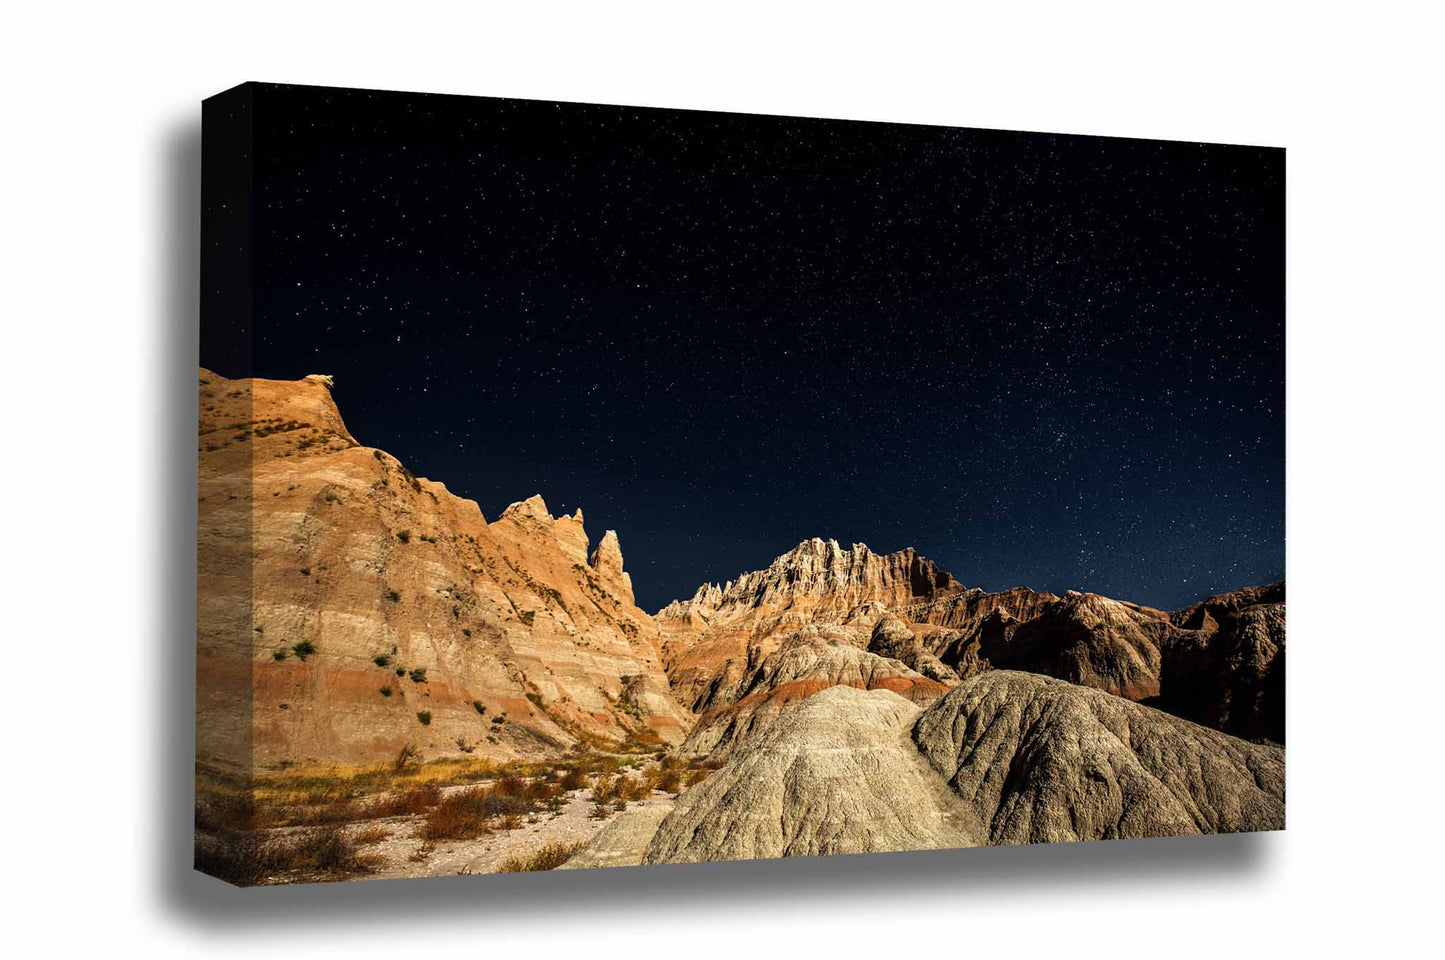 Great plains canvas wall art of a starry night sky over pinnacles in Badlands National Park, South Dakota by Sean Ramsey of Southern Plains Photography.